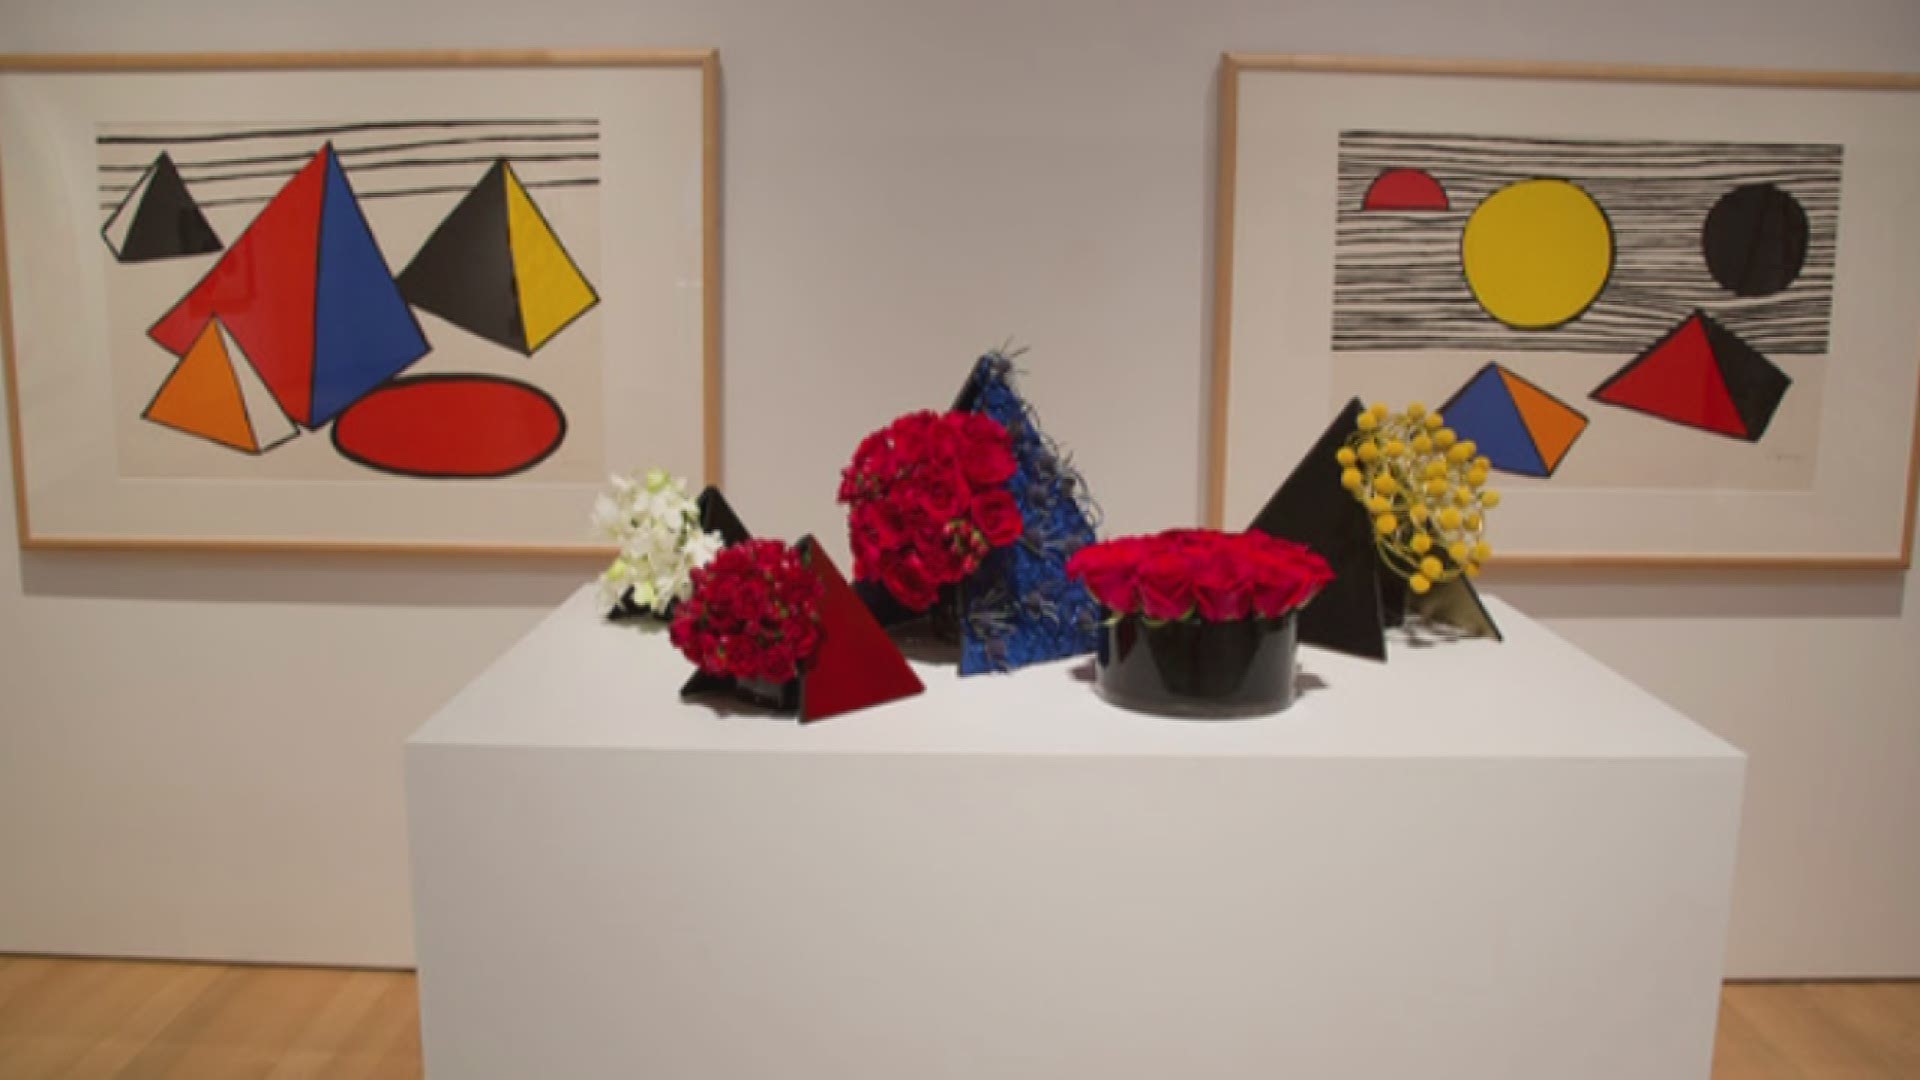 Grand Rapids Art Museum celebrates Spring with floral